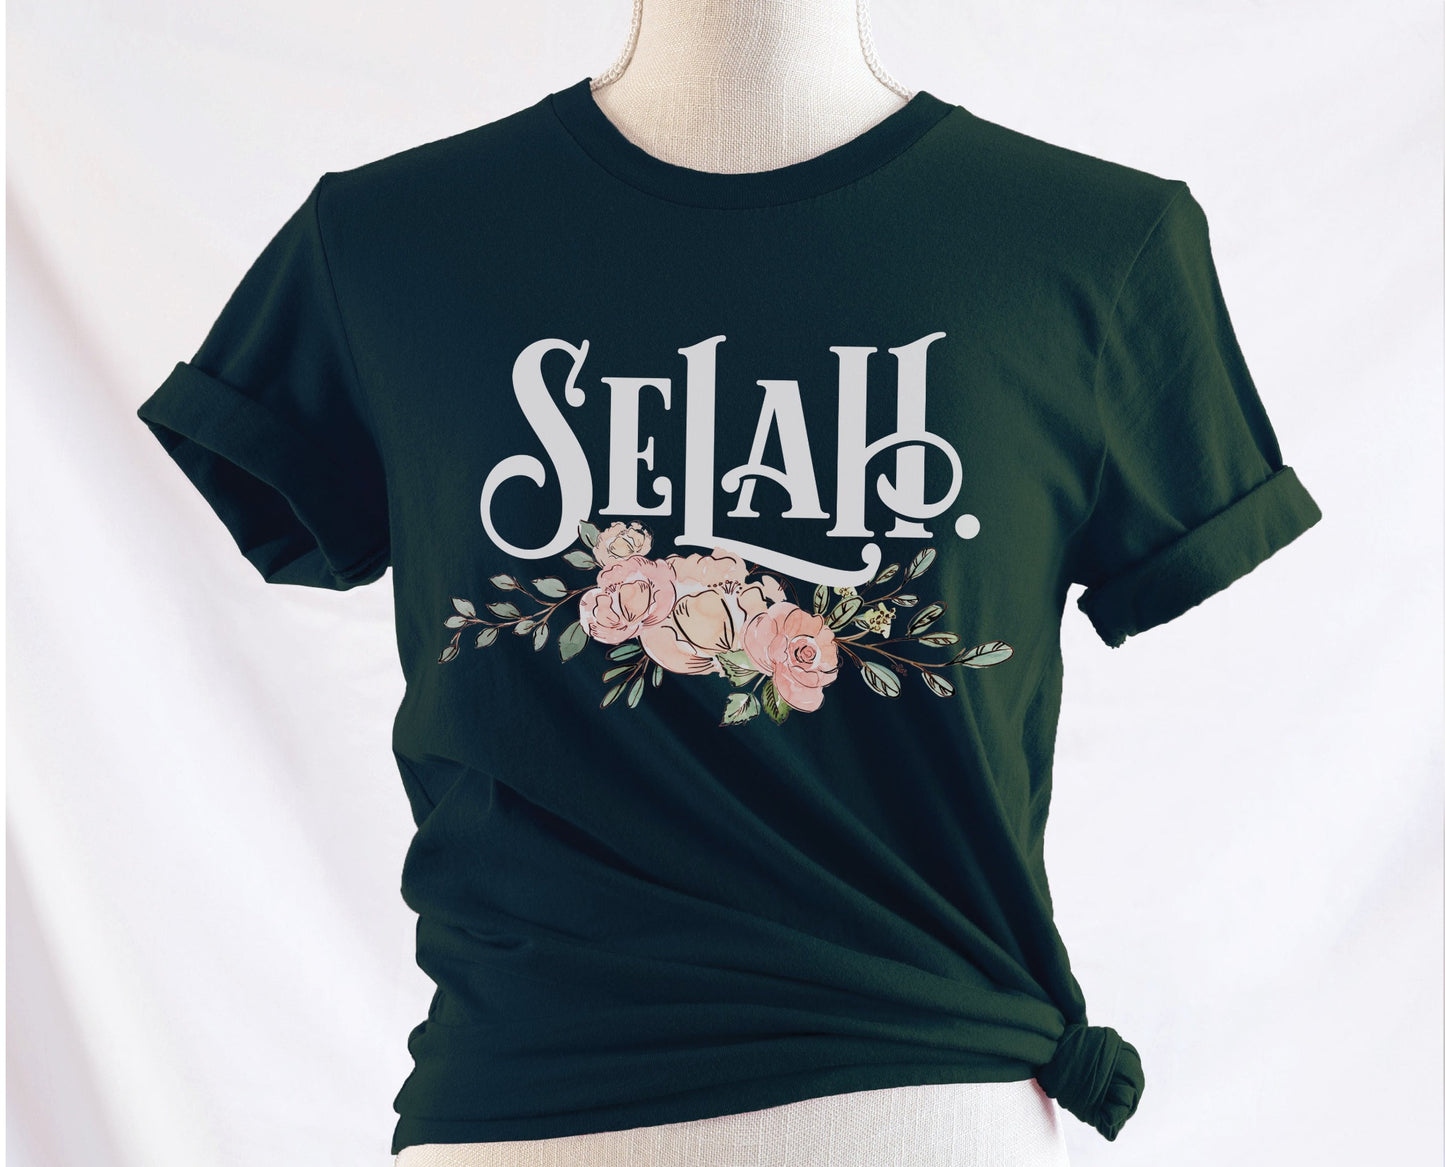 Selah Psalm bible verse watercolor floral Christian aesthetic design printed in white peach blush pink on soft forest green t-shirt for women